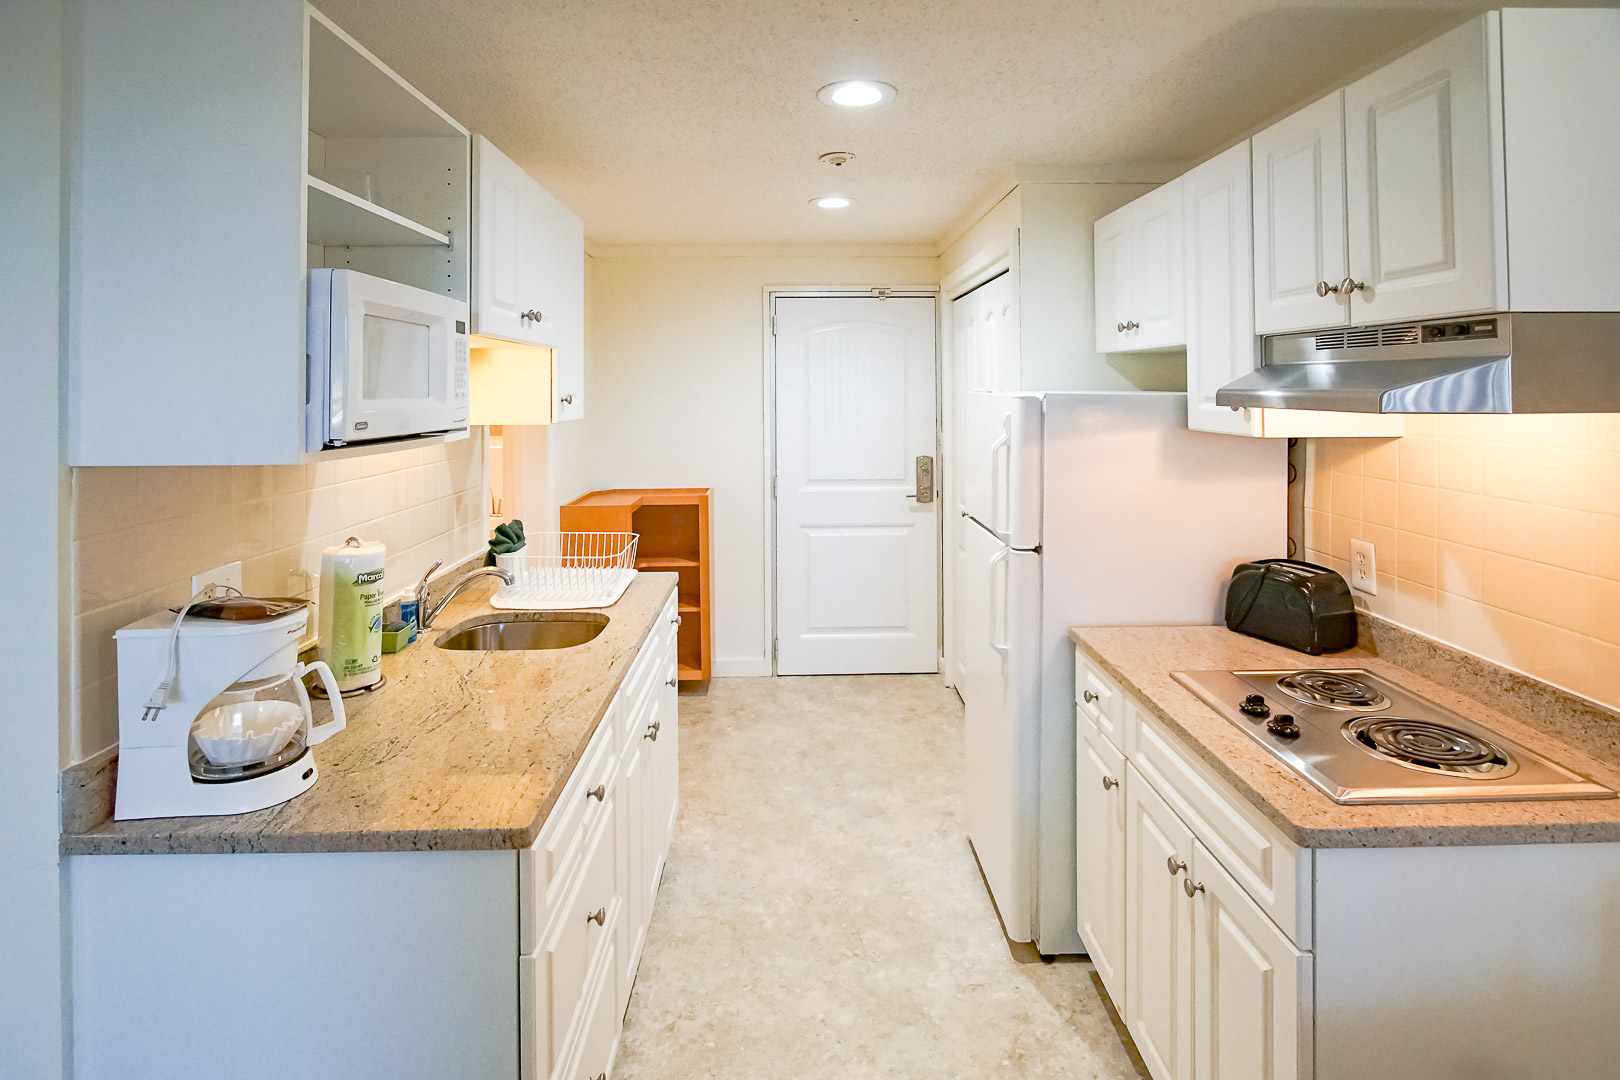 A renovated kitchen area at VRI's Courtyard Resort in Massachusetts.